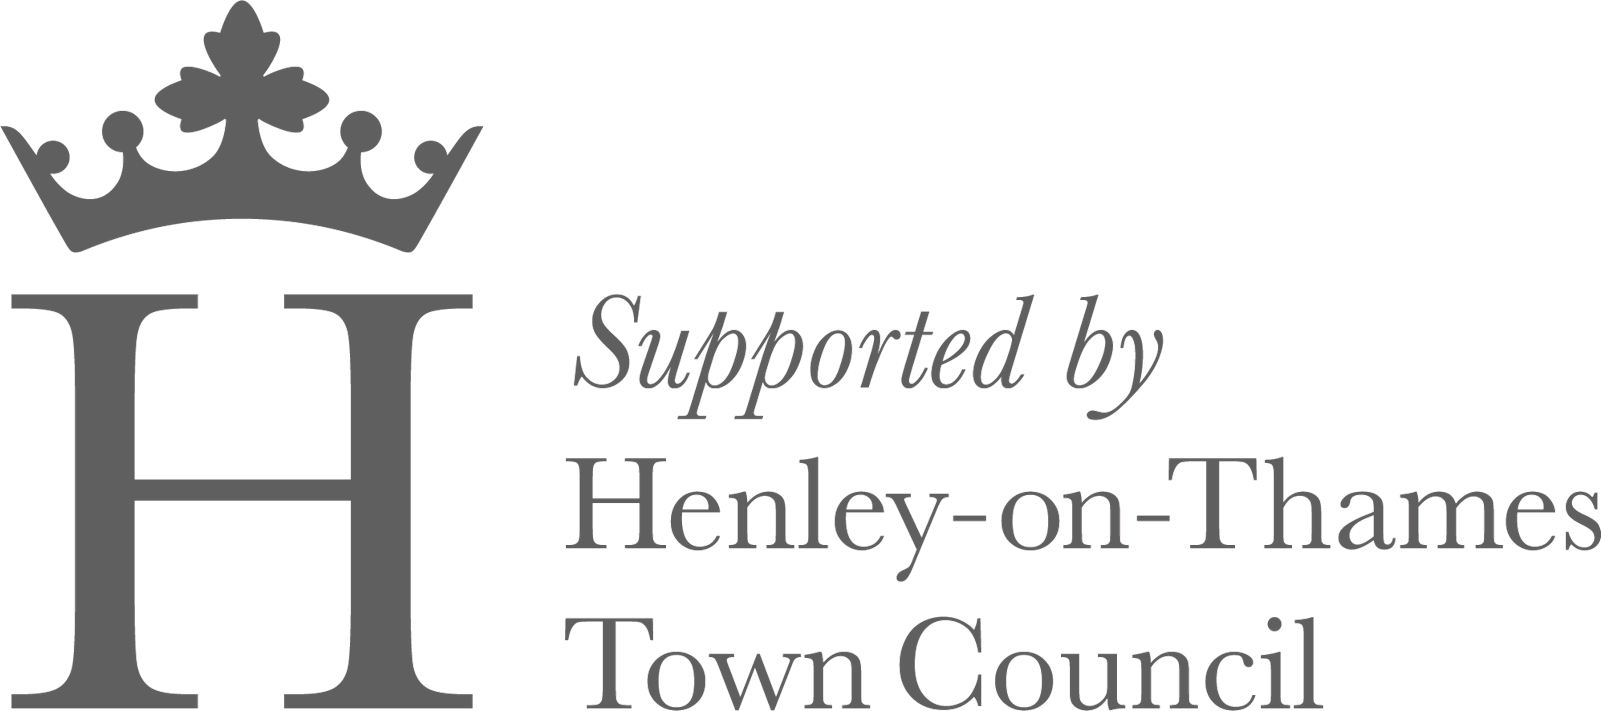 Henley-on-Thames Council